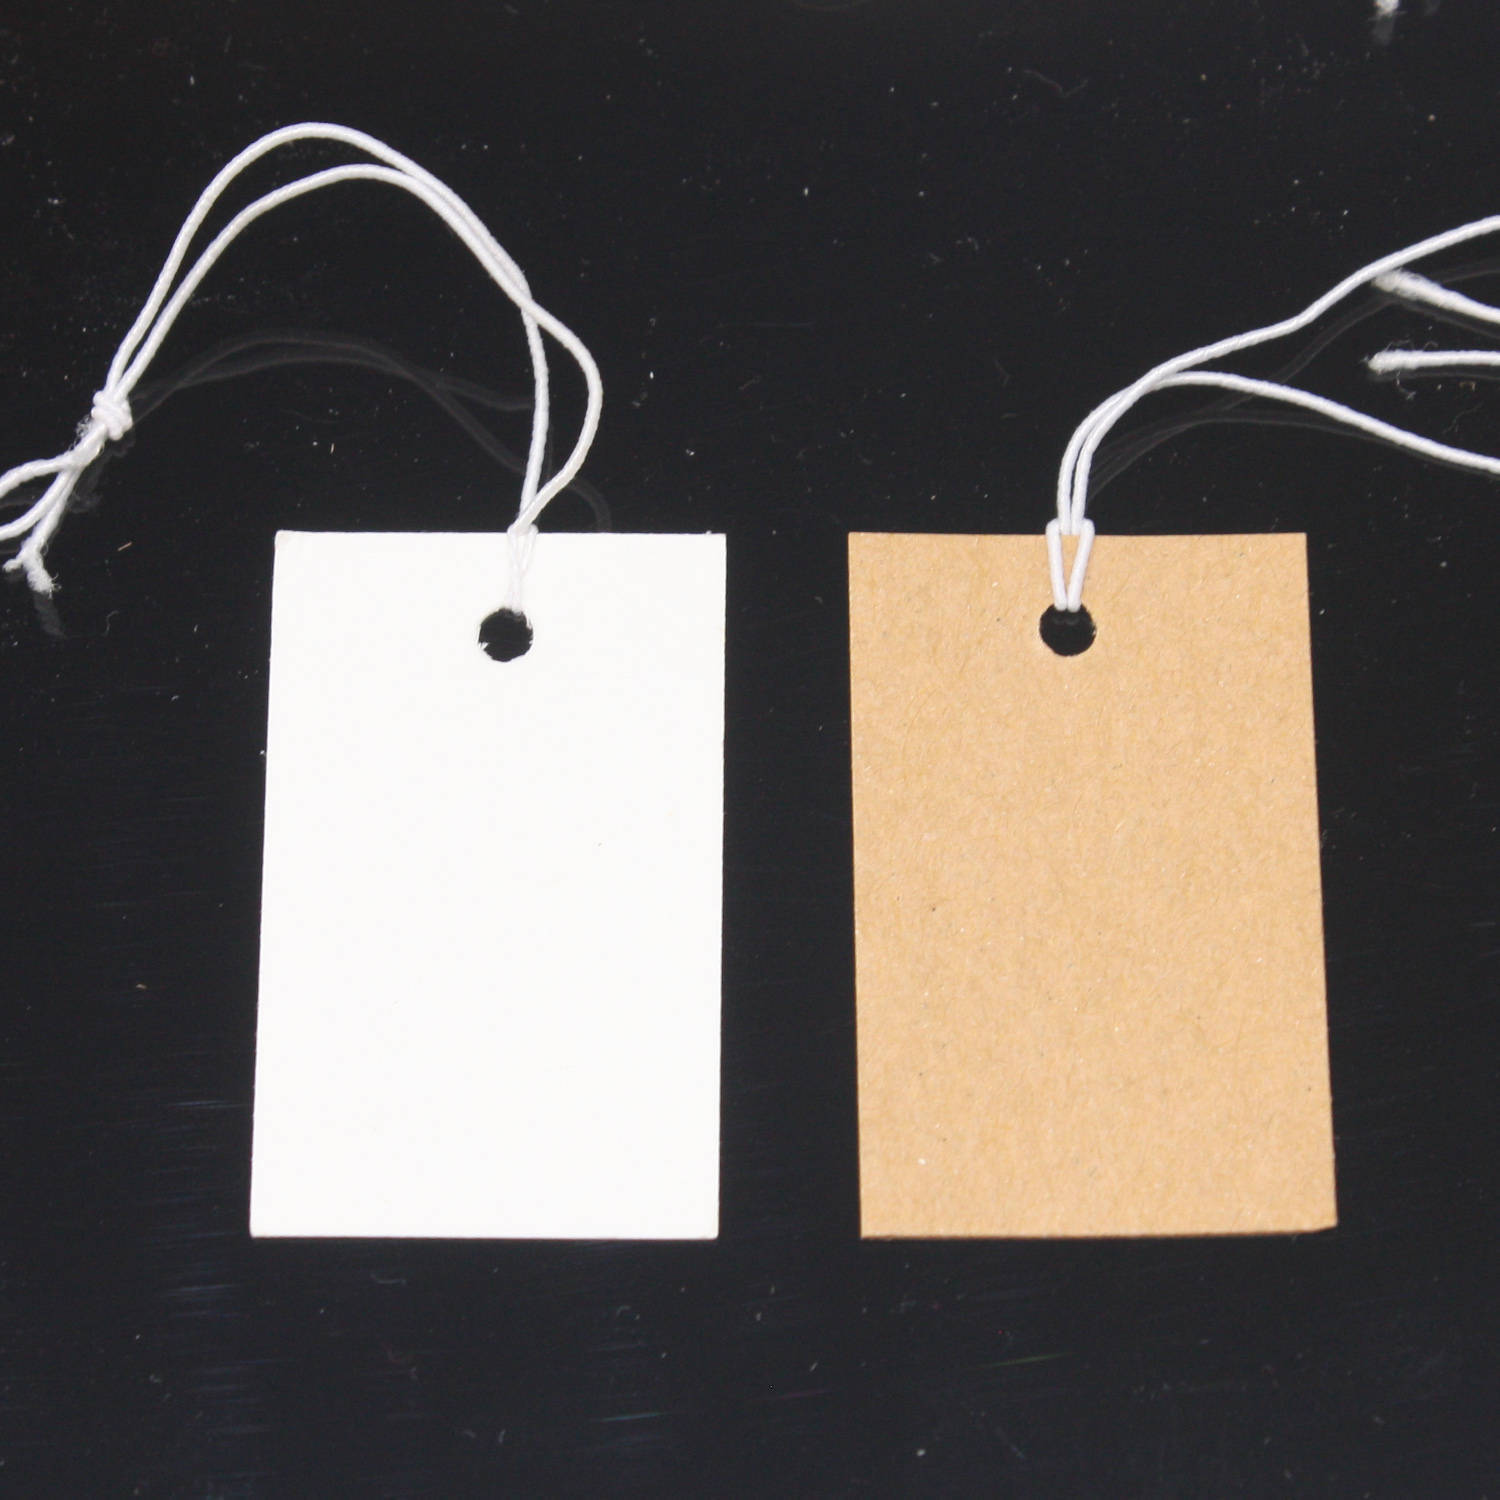 Brown Strung Tie On Tags Labels Retail Luggage With String